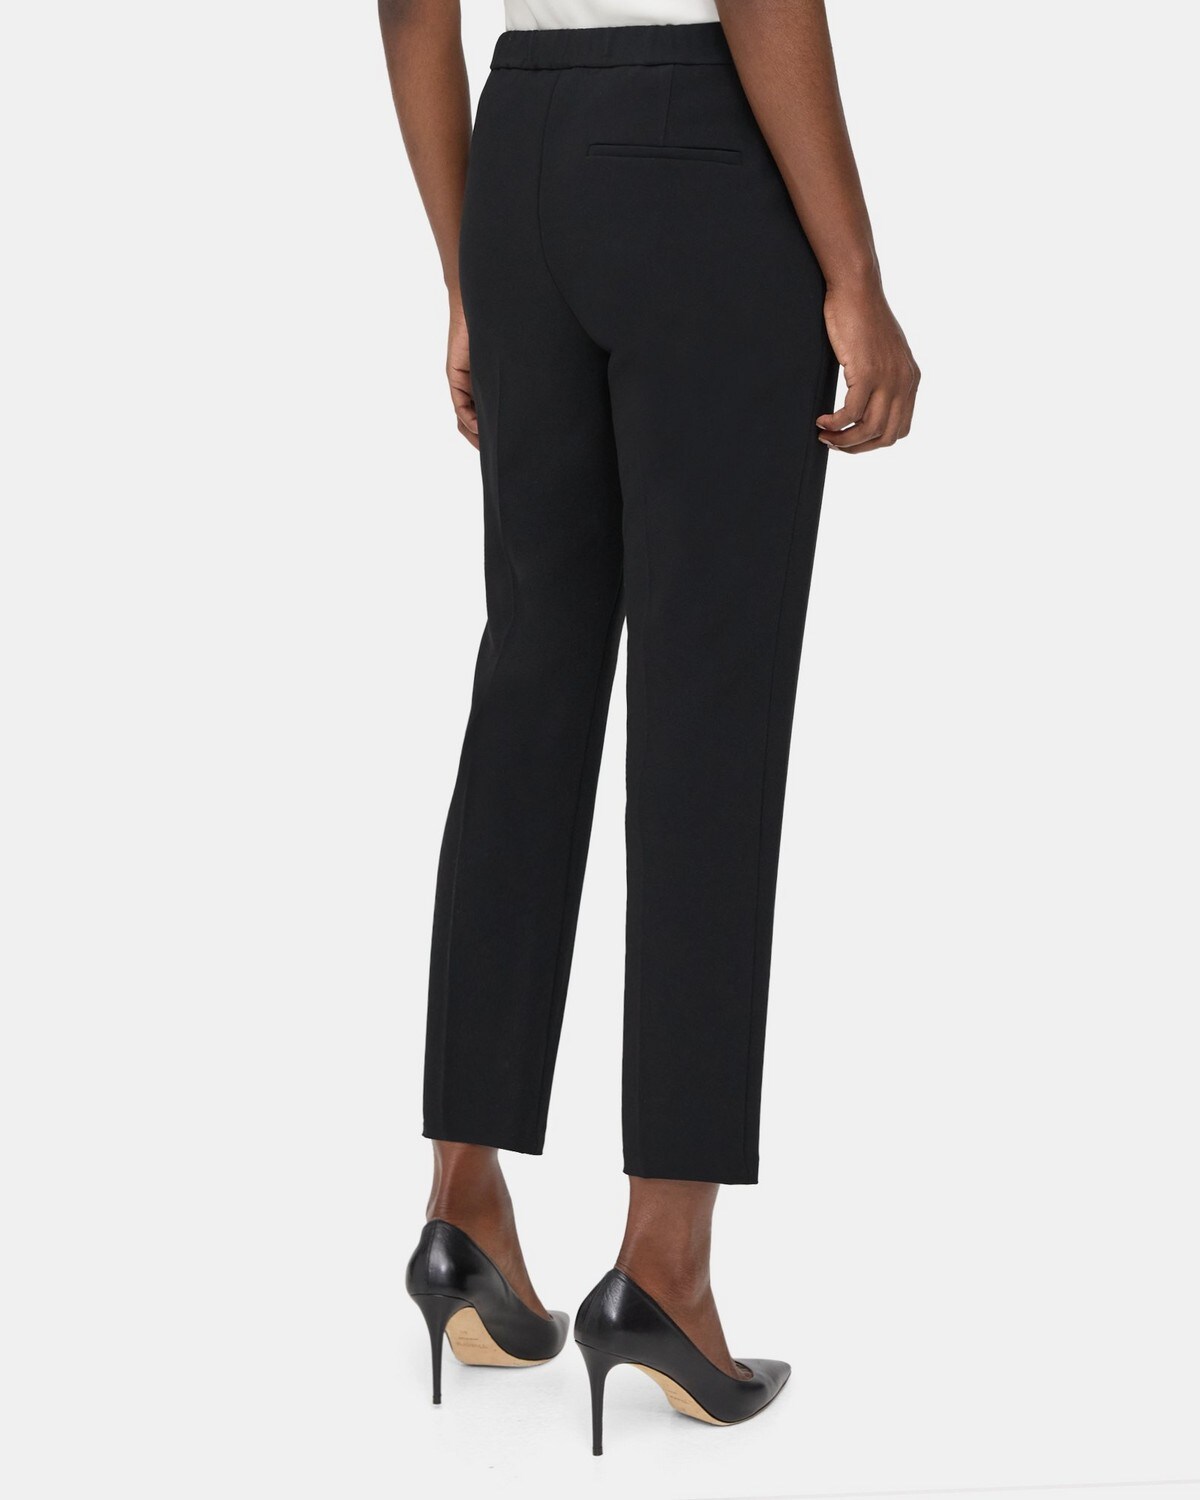 Slim Cropped Pull-On Pant in Crepe